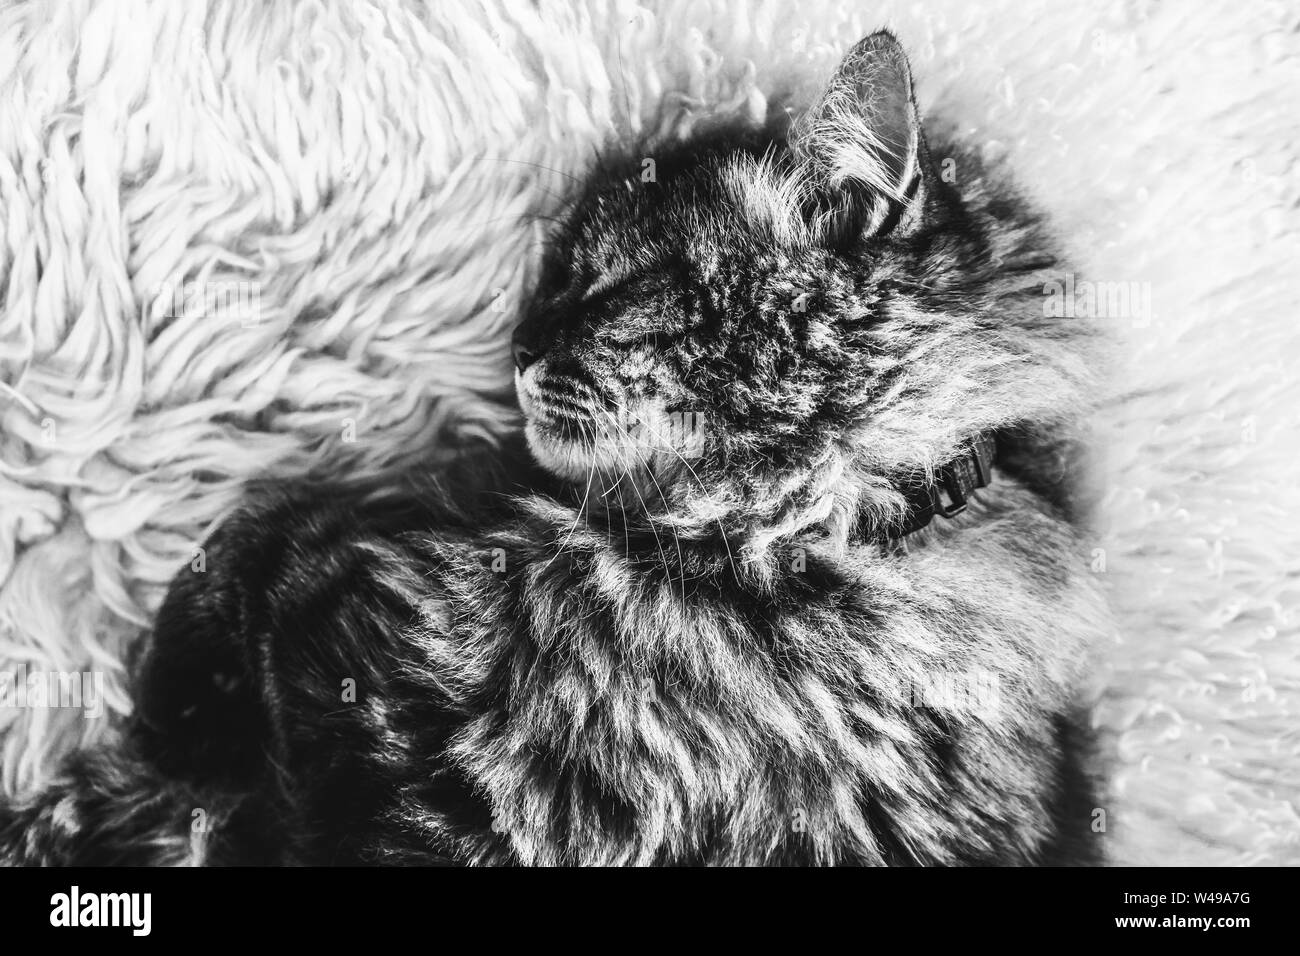 Black and white photography of sleeping tabby cat on white fluffy carpet. Black cat collar around neck. Persian cat. Taking a nap, animals sleep. Black and white photos. Stock Photo